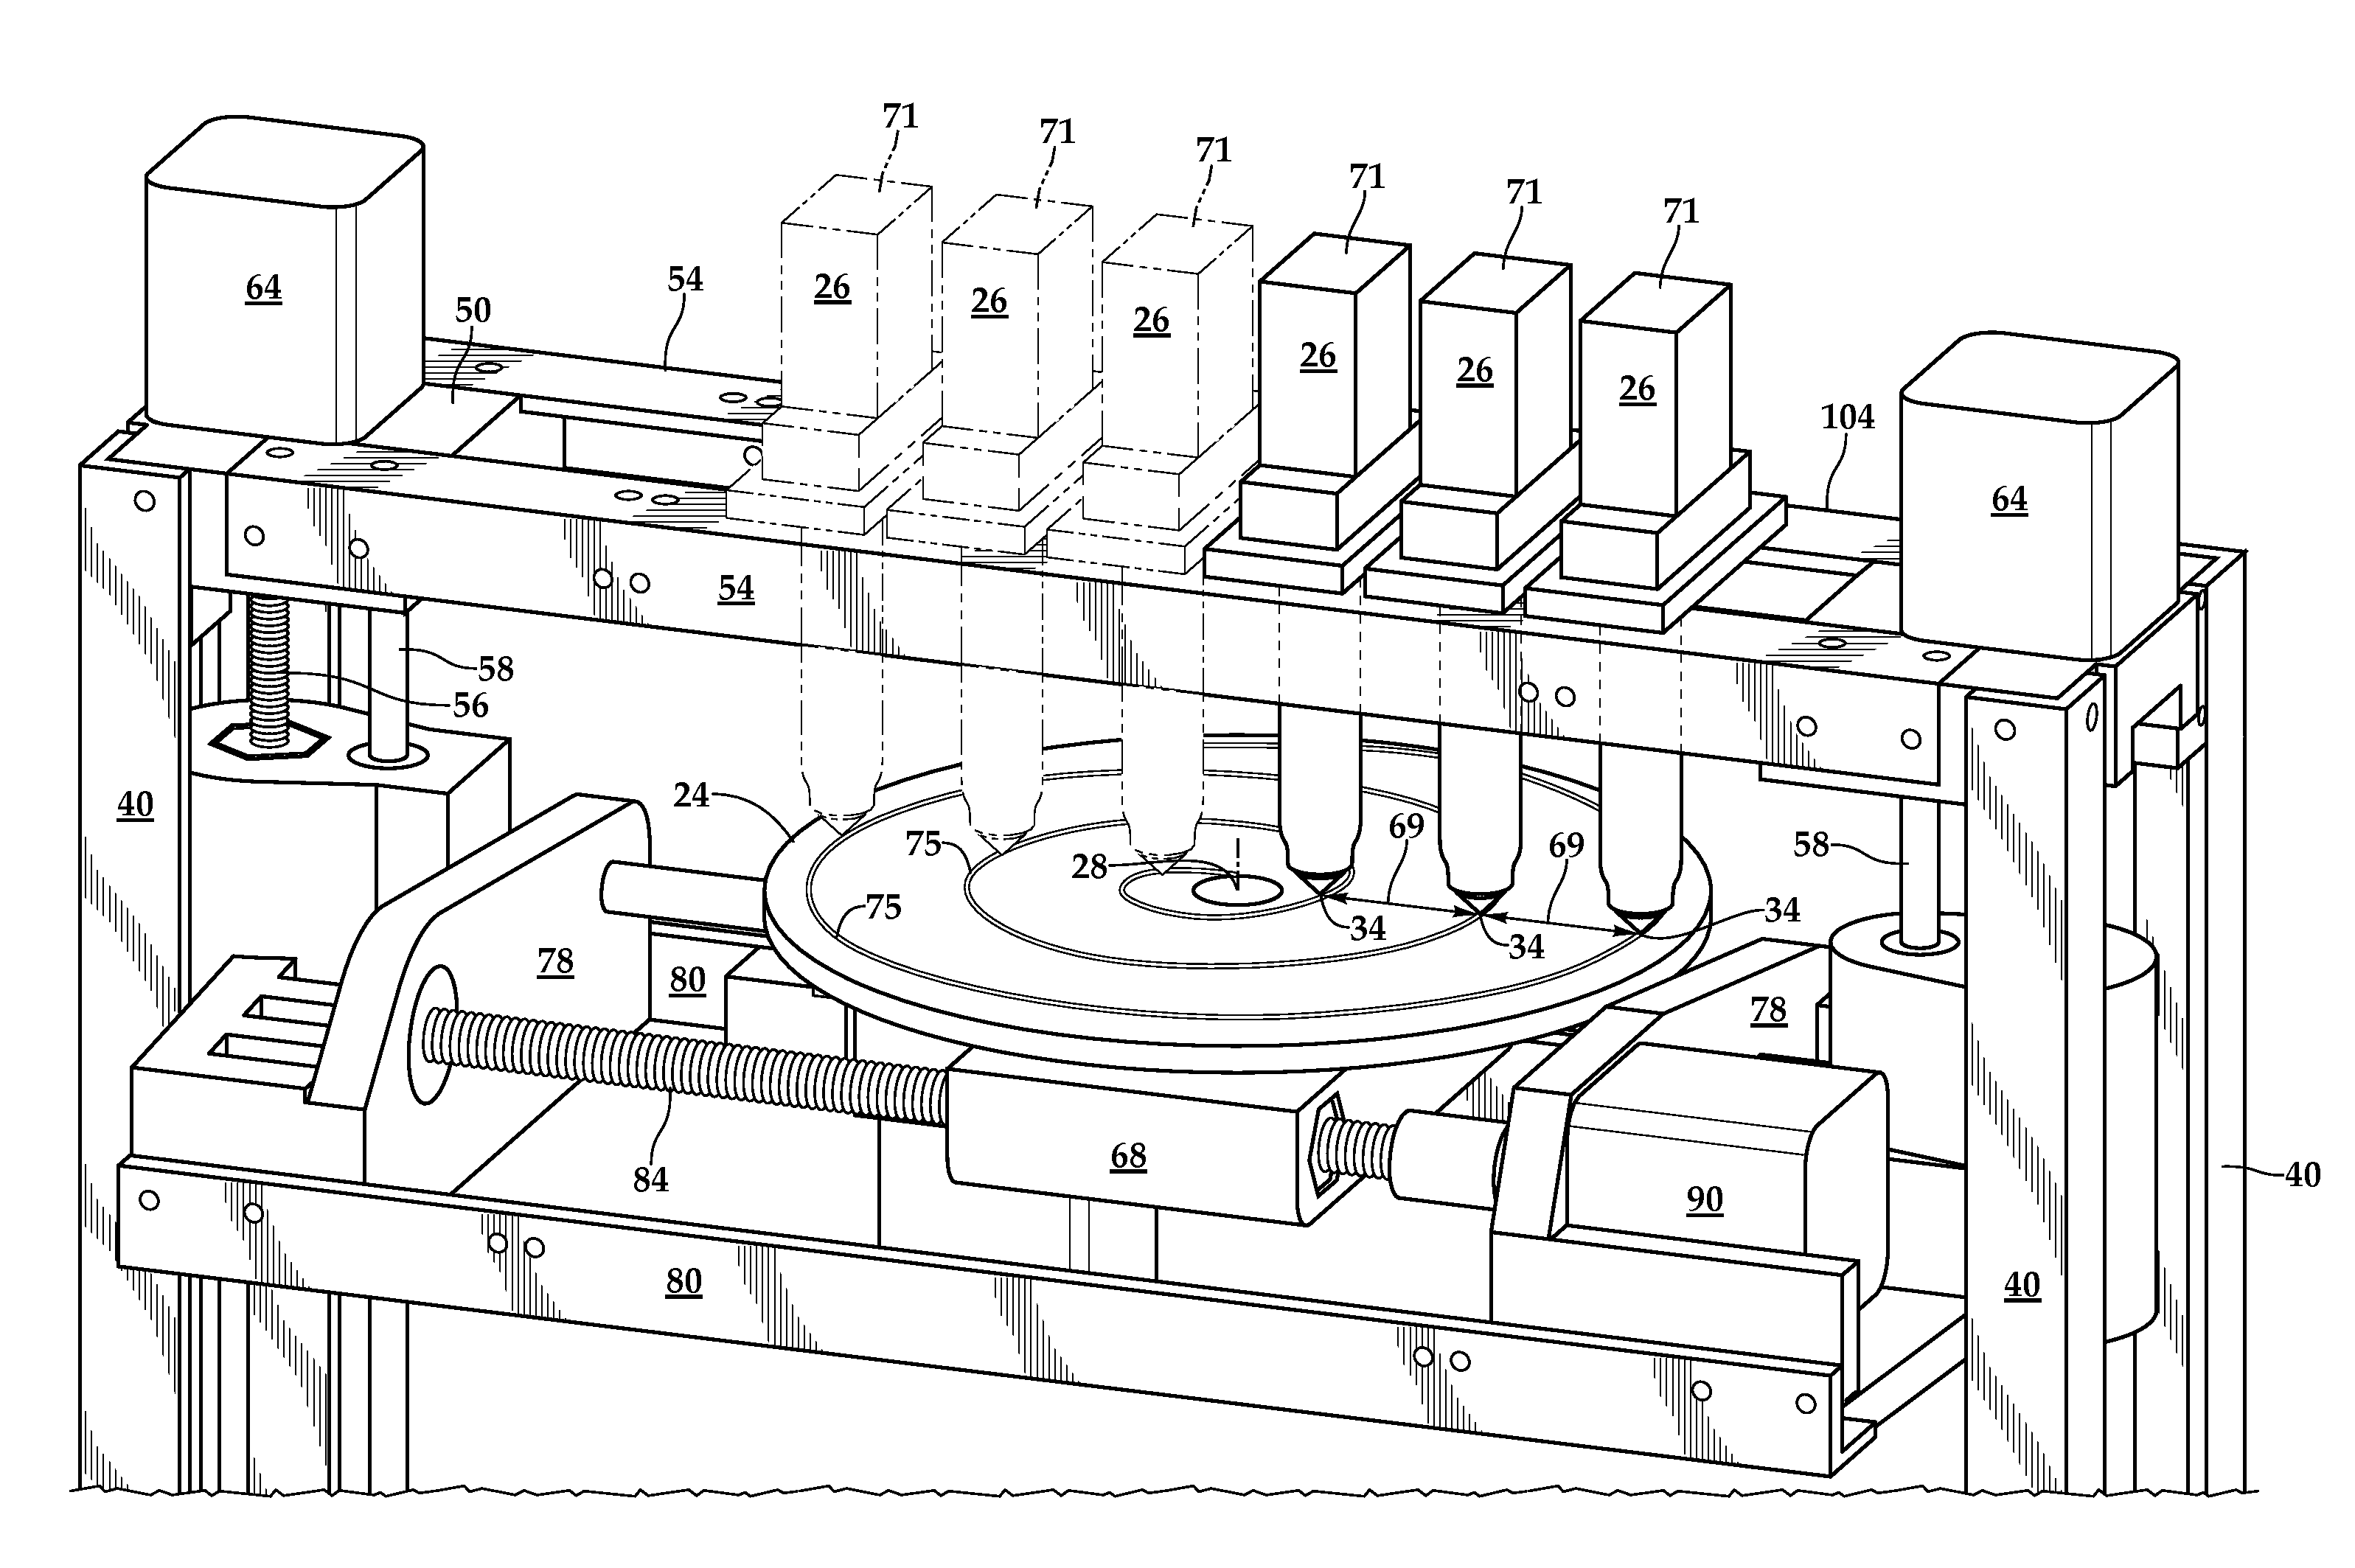 Fixed Printhead Fused Filament Fabrication Printer and Method